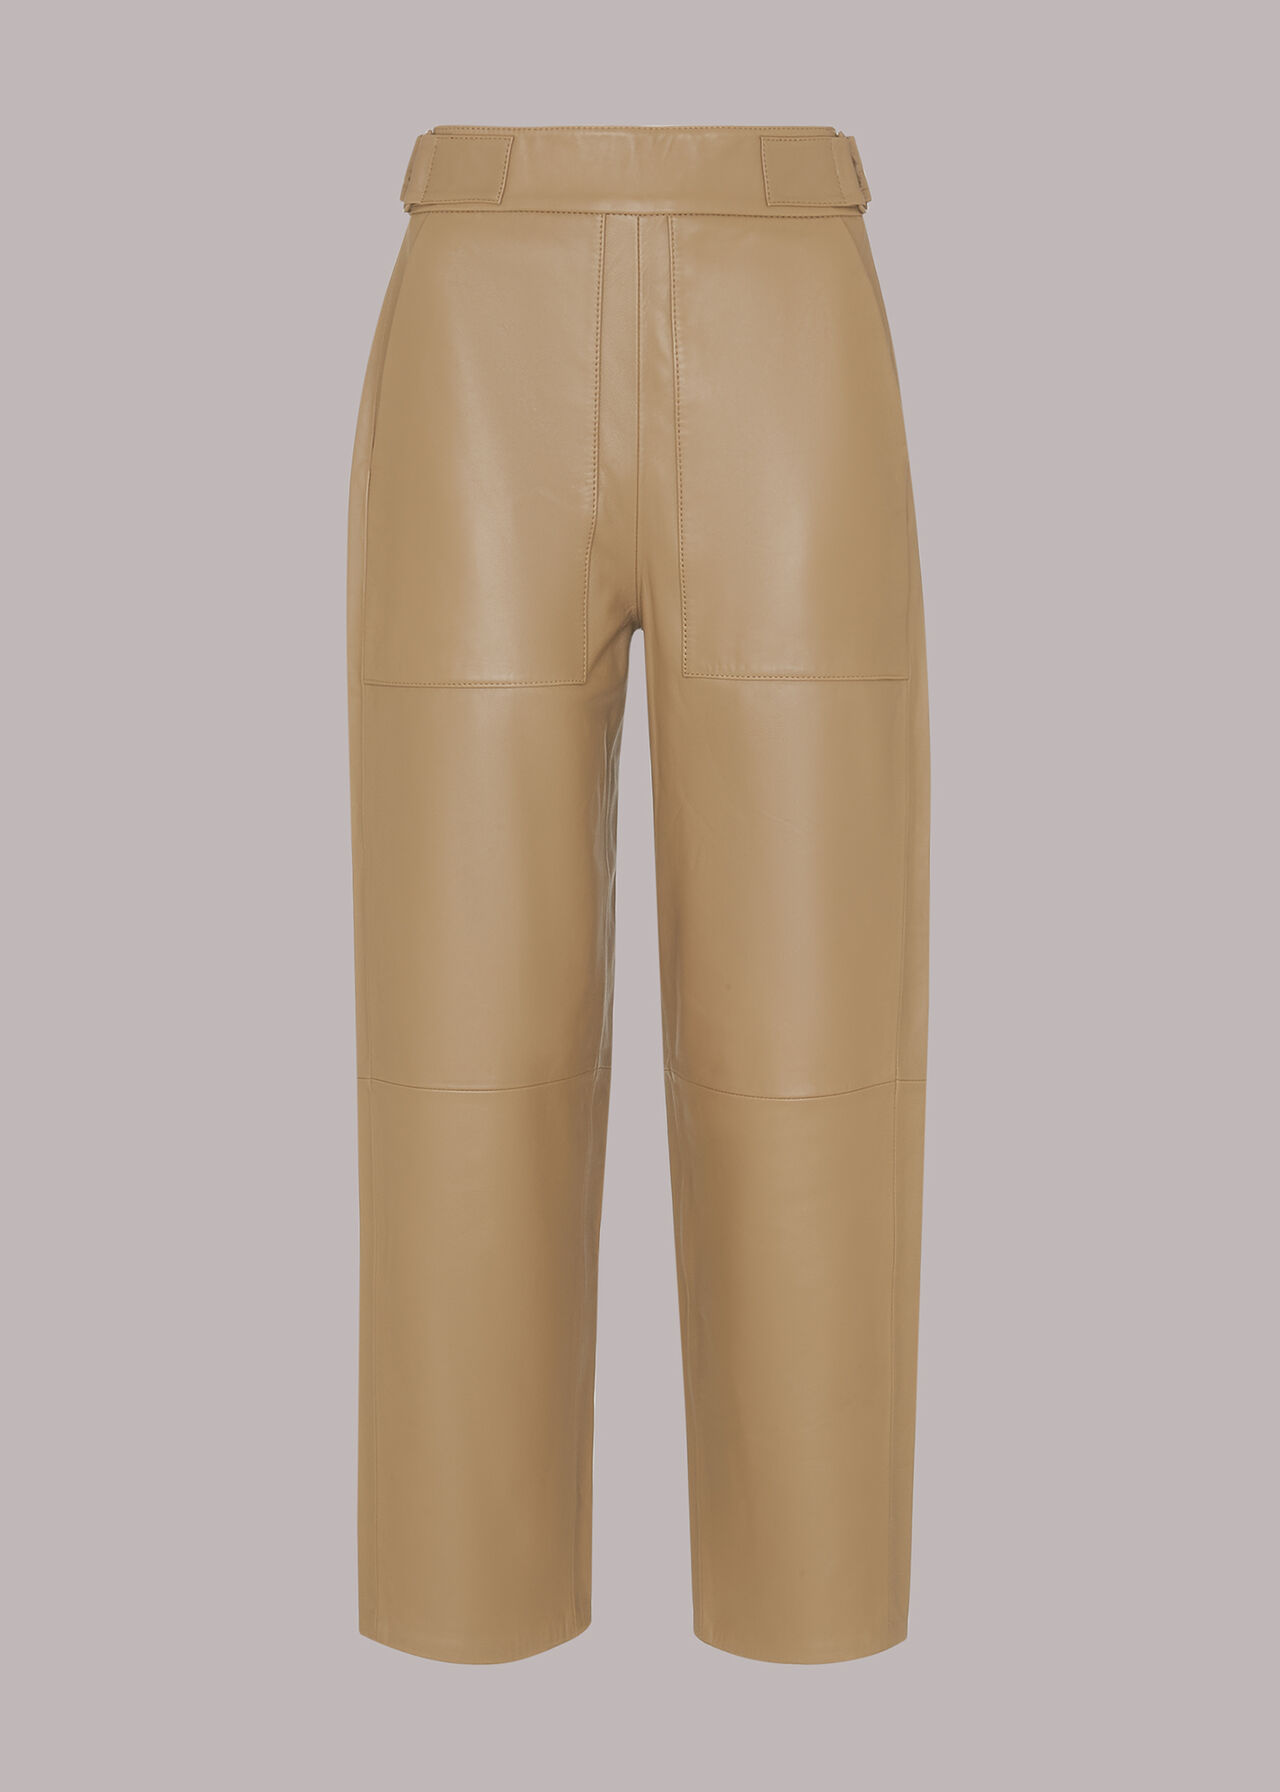 Arden Panelled Leather Trouser